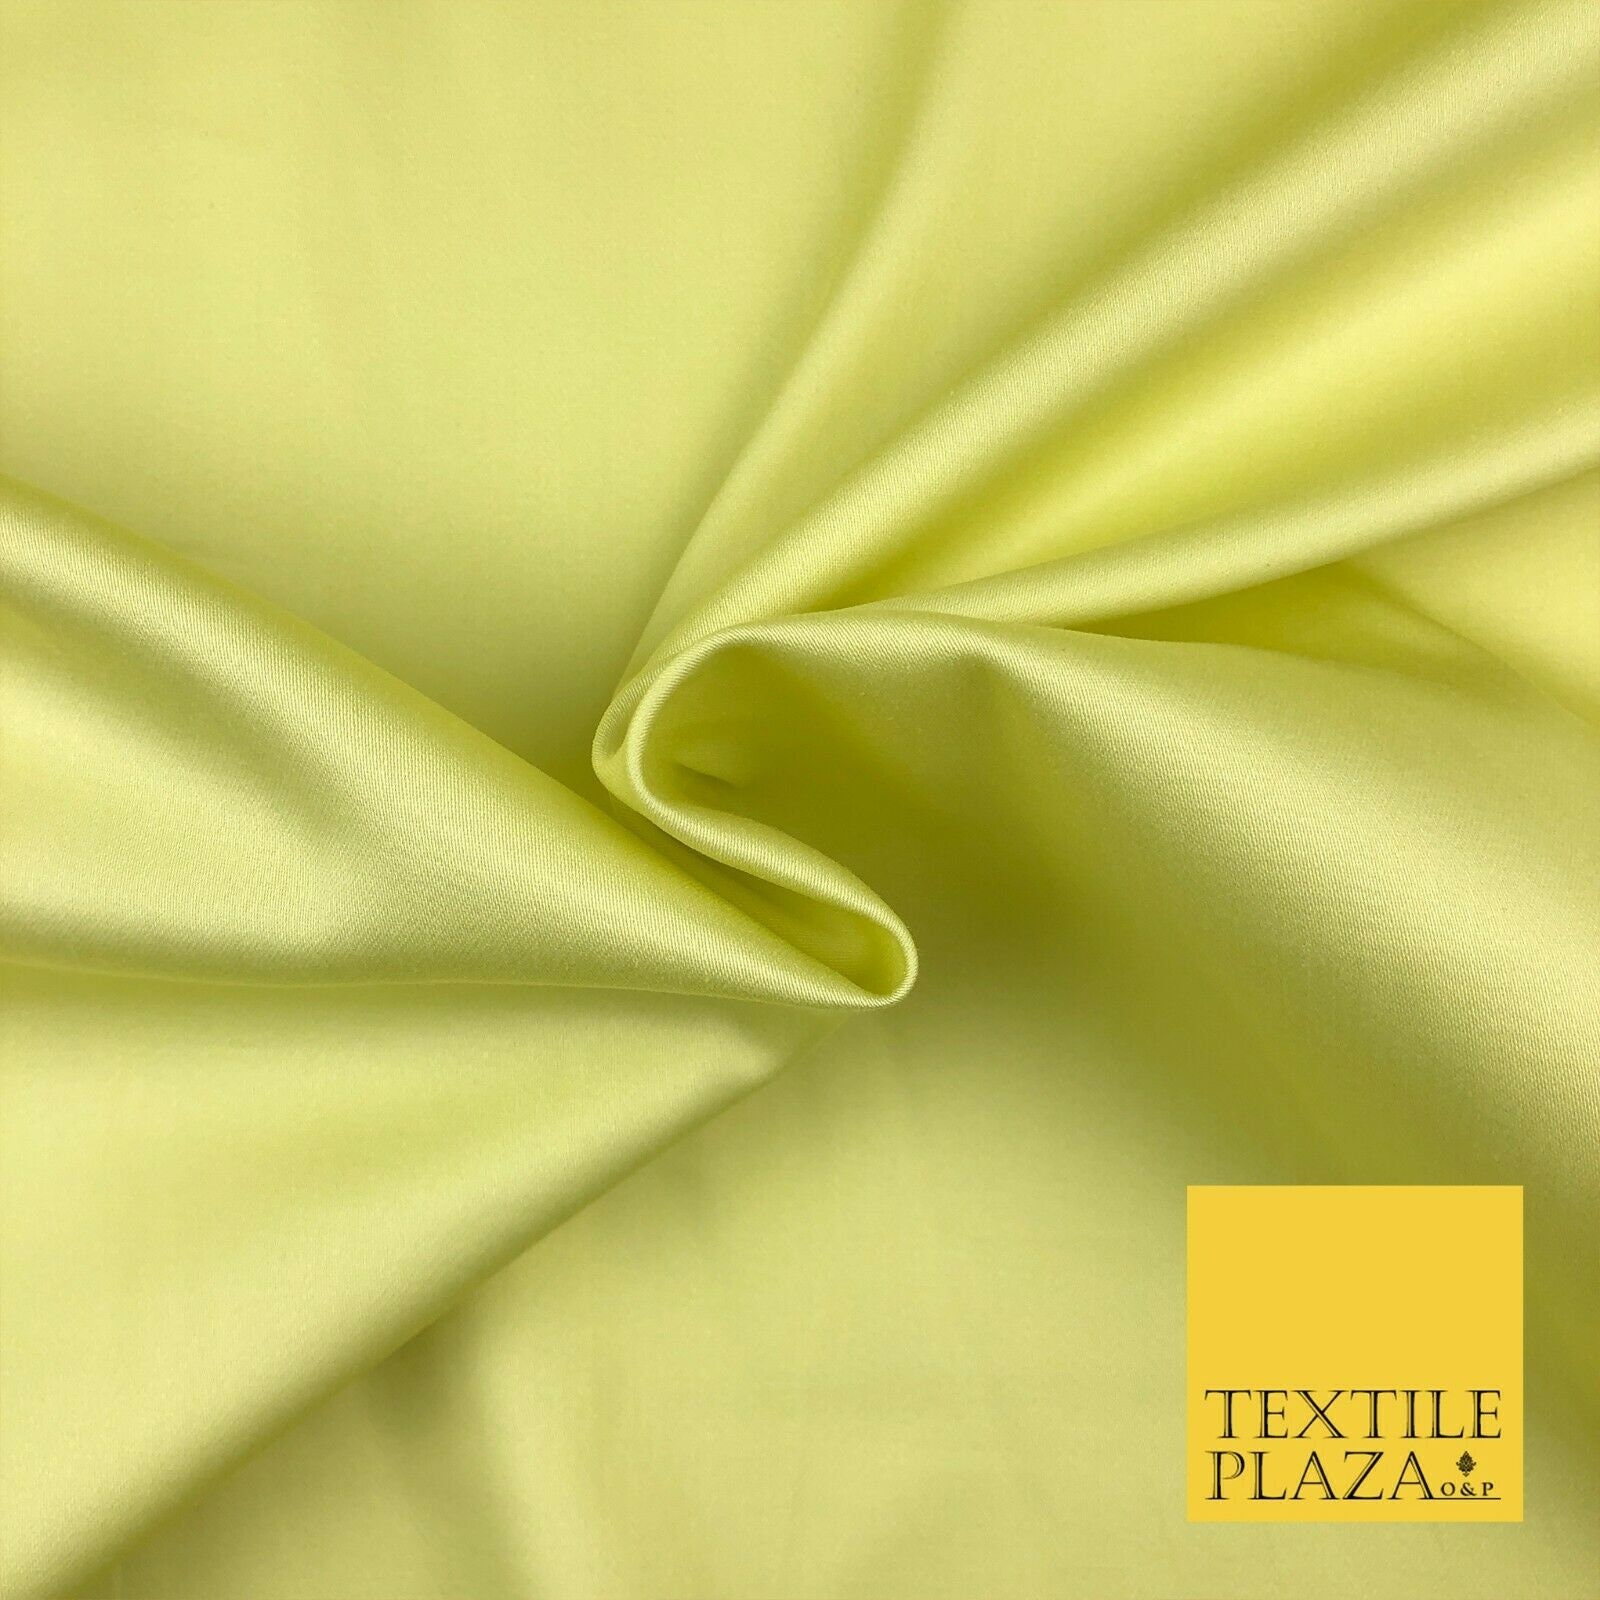 Heritage Fabrics Sateen Cotton Blend Fabric Emory Chive Green